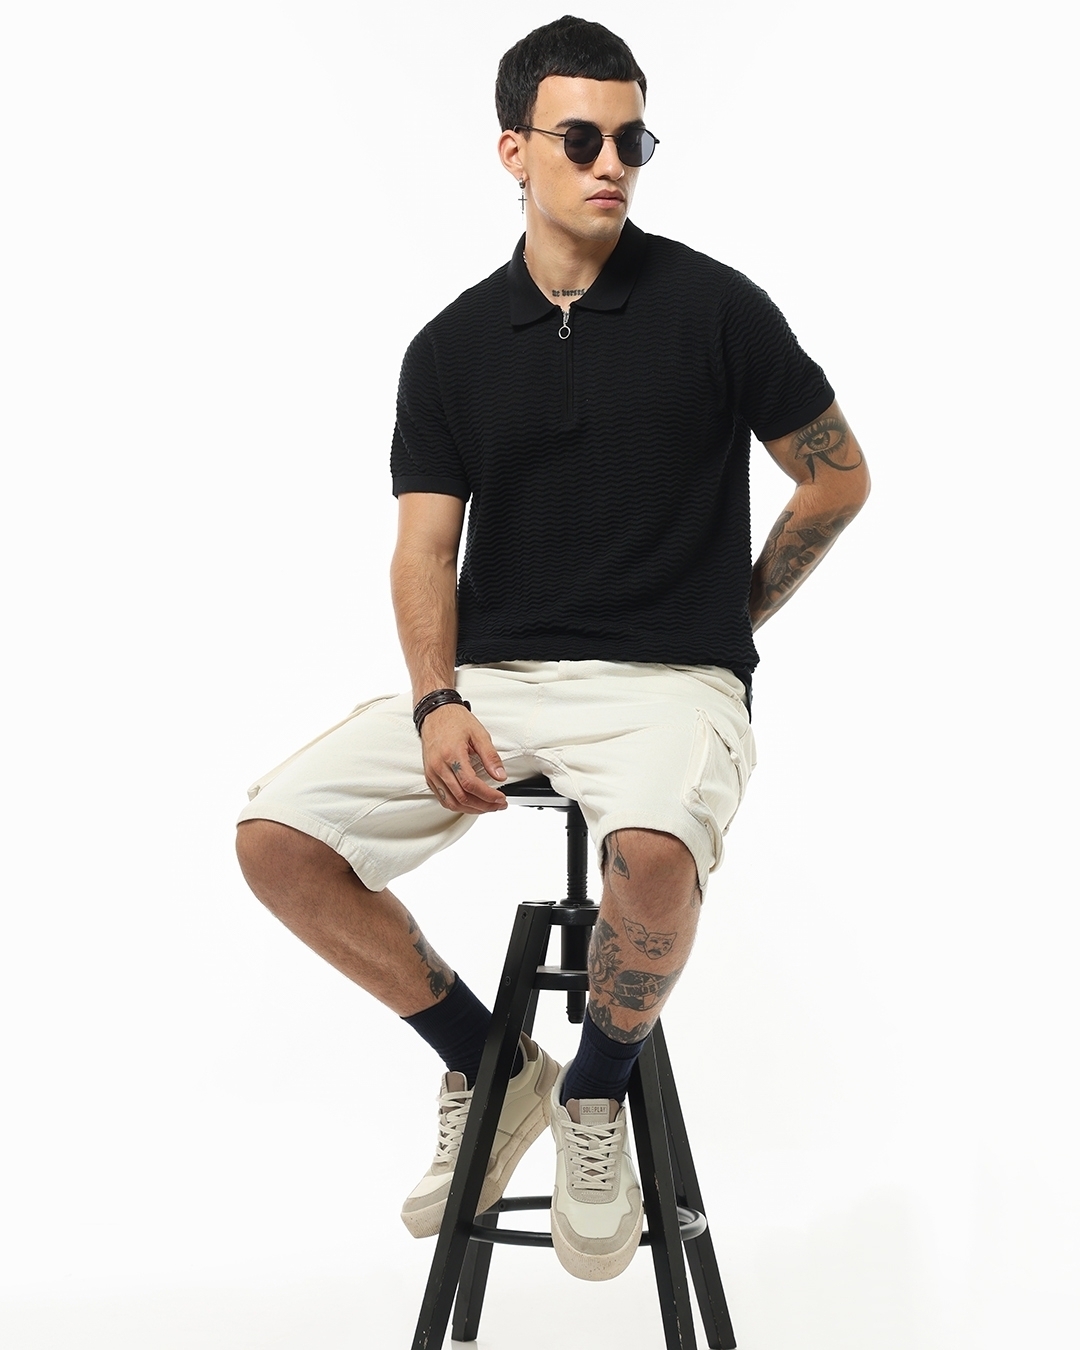 Polo T Shirts Style for Men - casual outfits for men | Bewakoof Blog